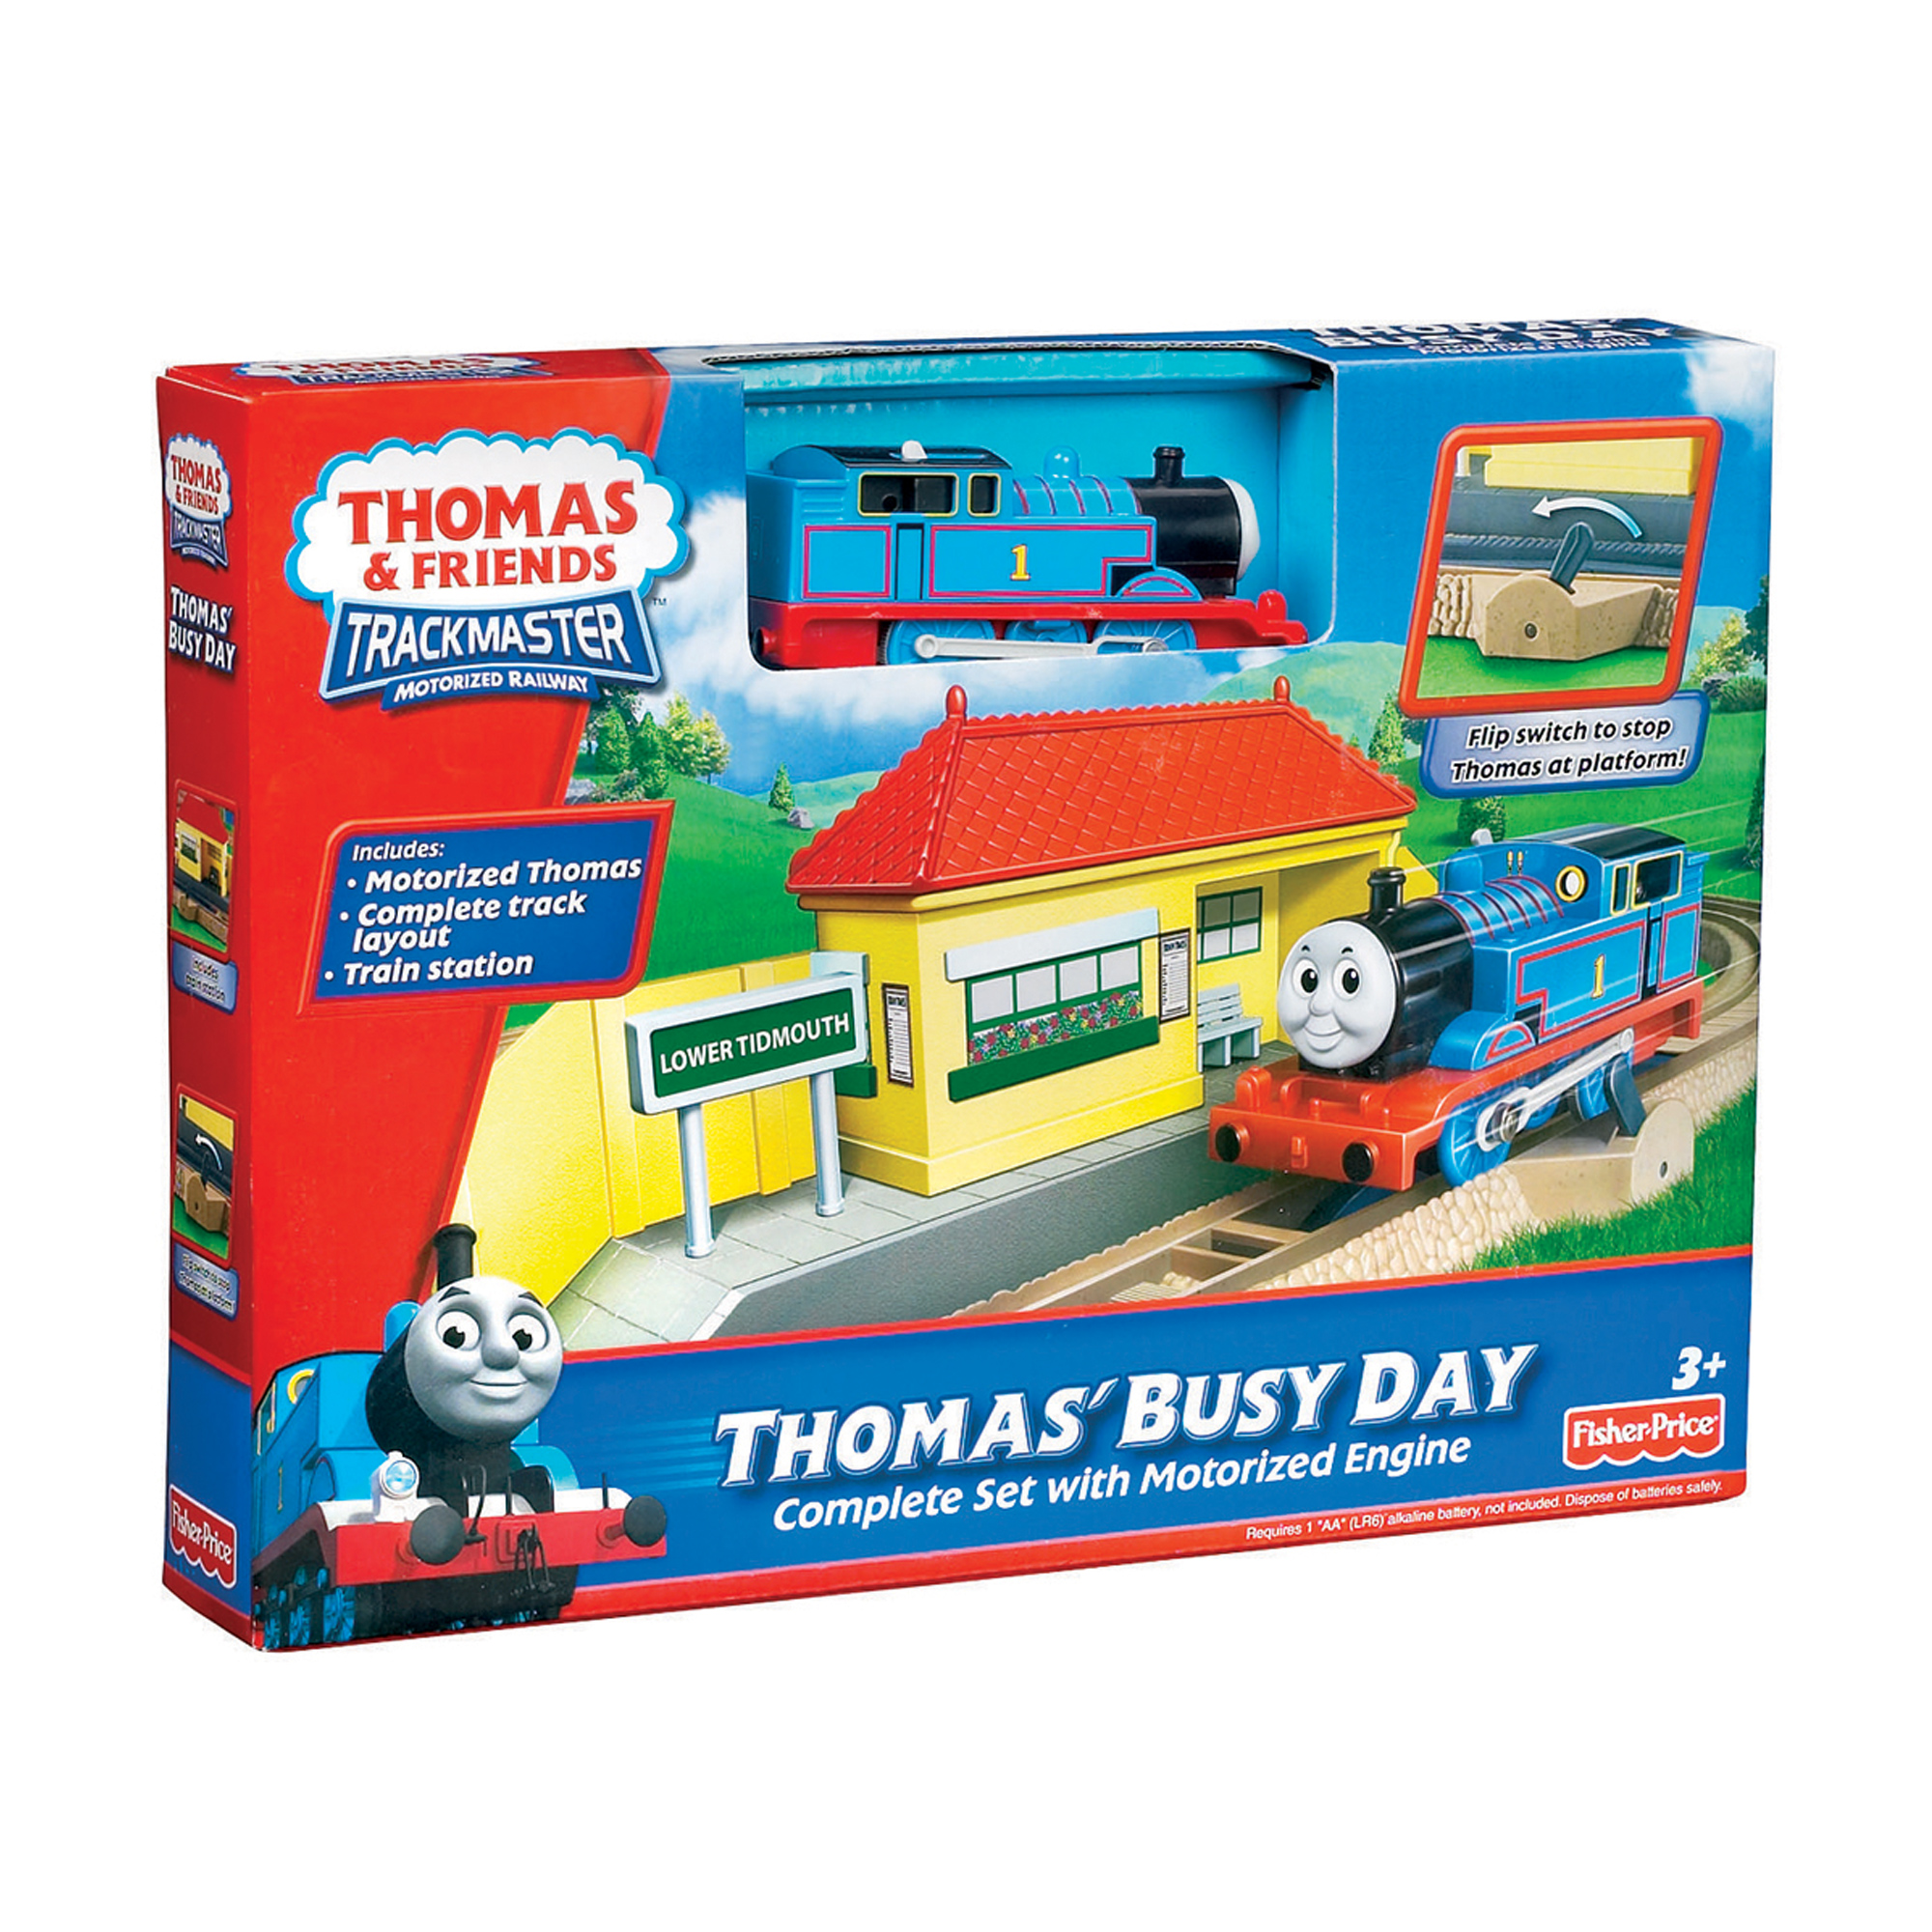 Trackmaster Thomas Busy Day